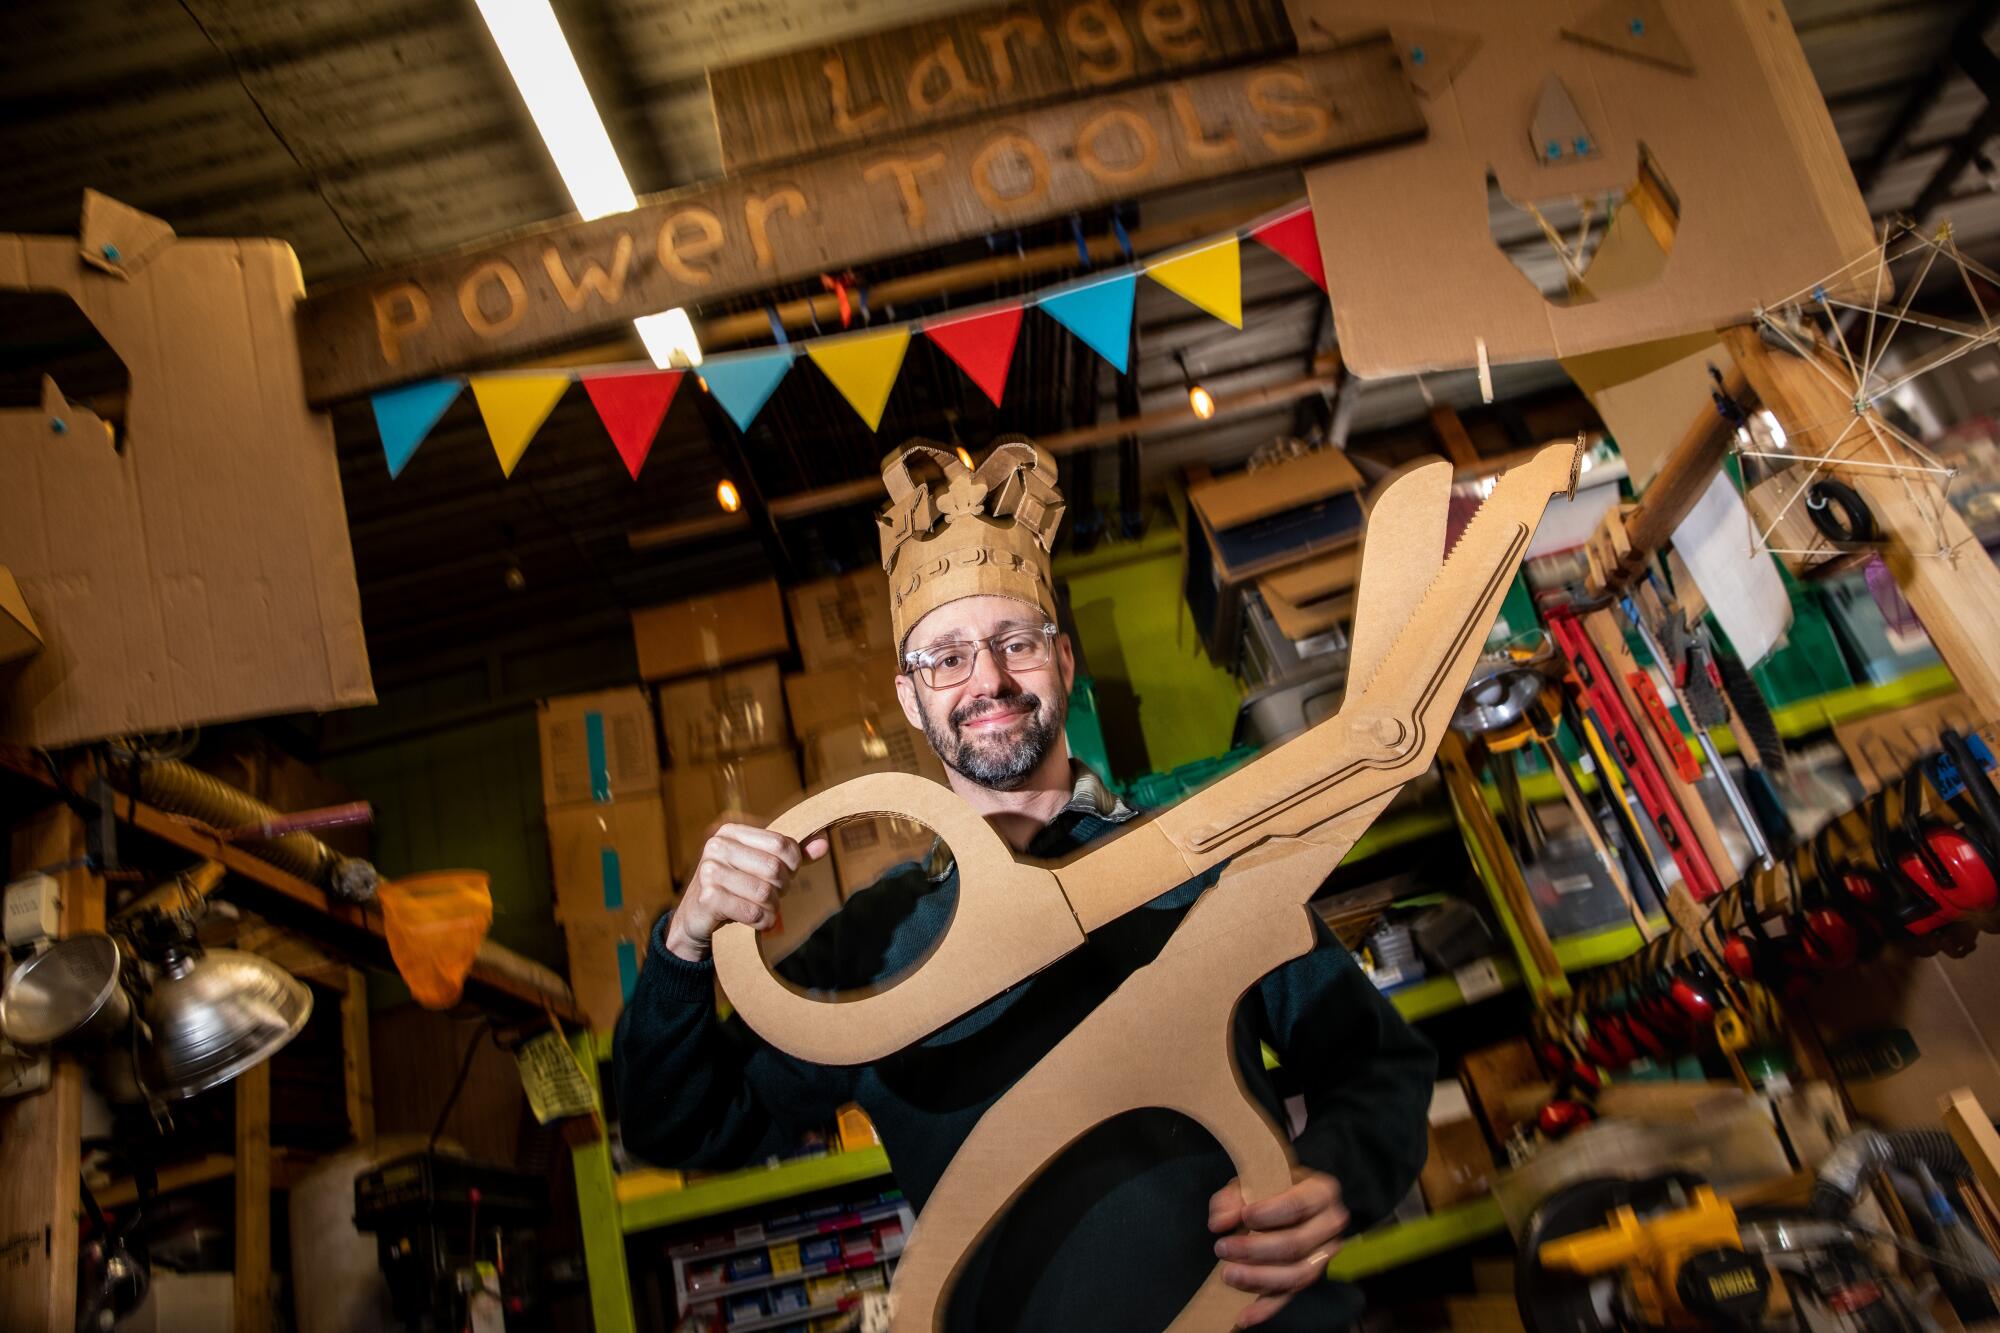 A man wearing a cardboard crown holds a large pair of scissors that is cut from cardboard.